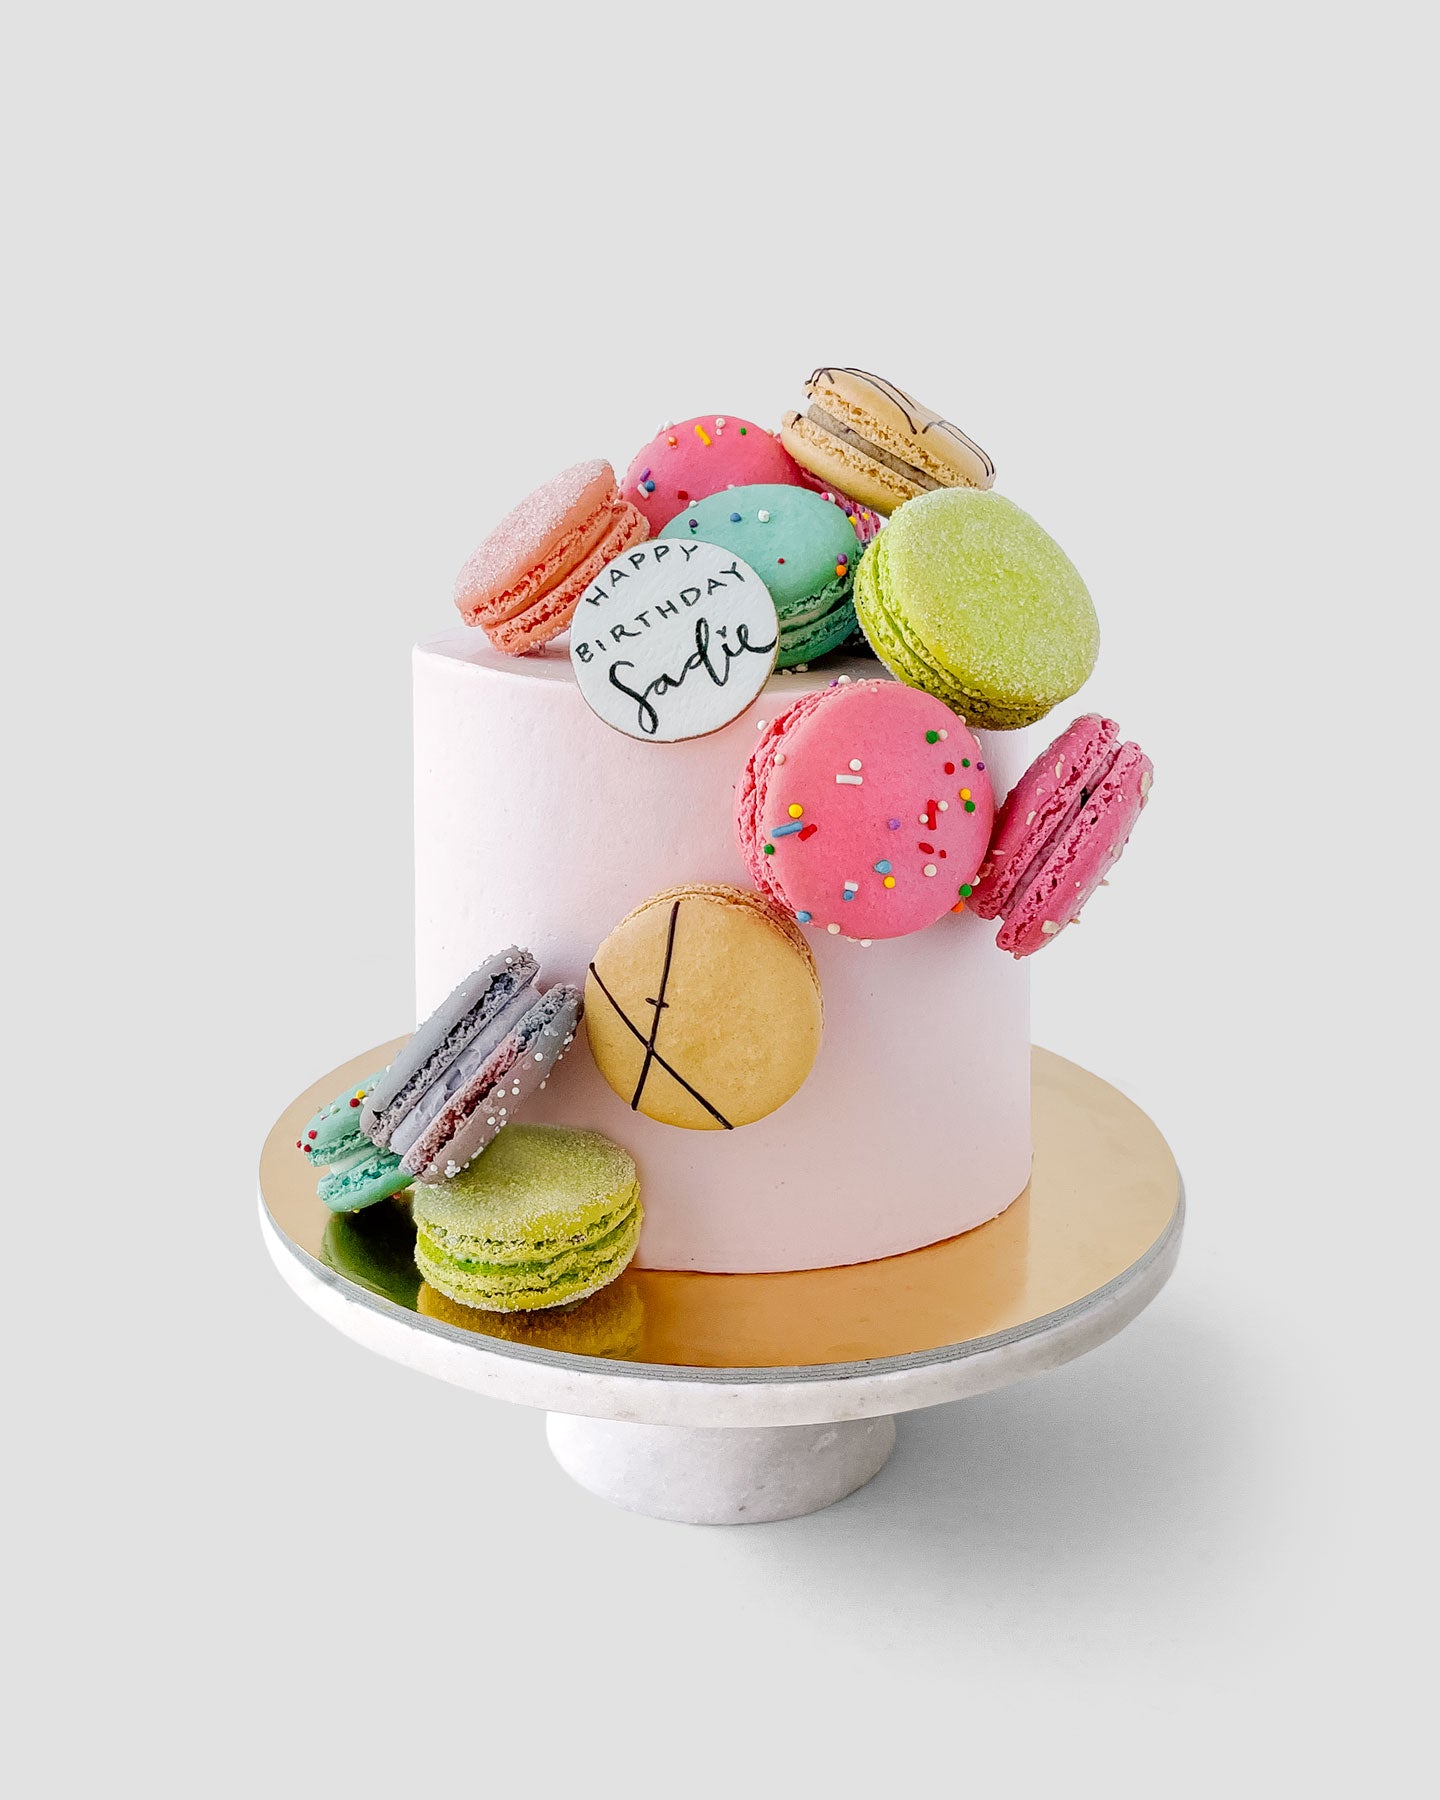 Le Macaron Cake – Bittersweet Pastry Shop